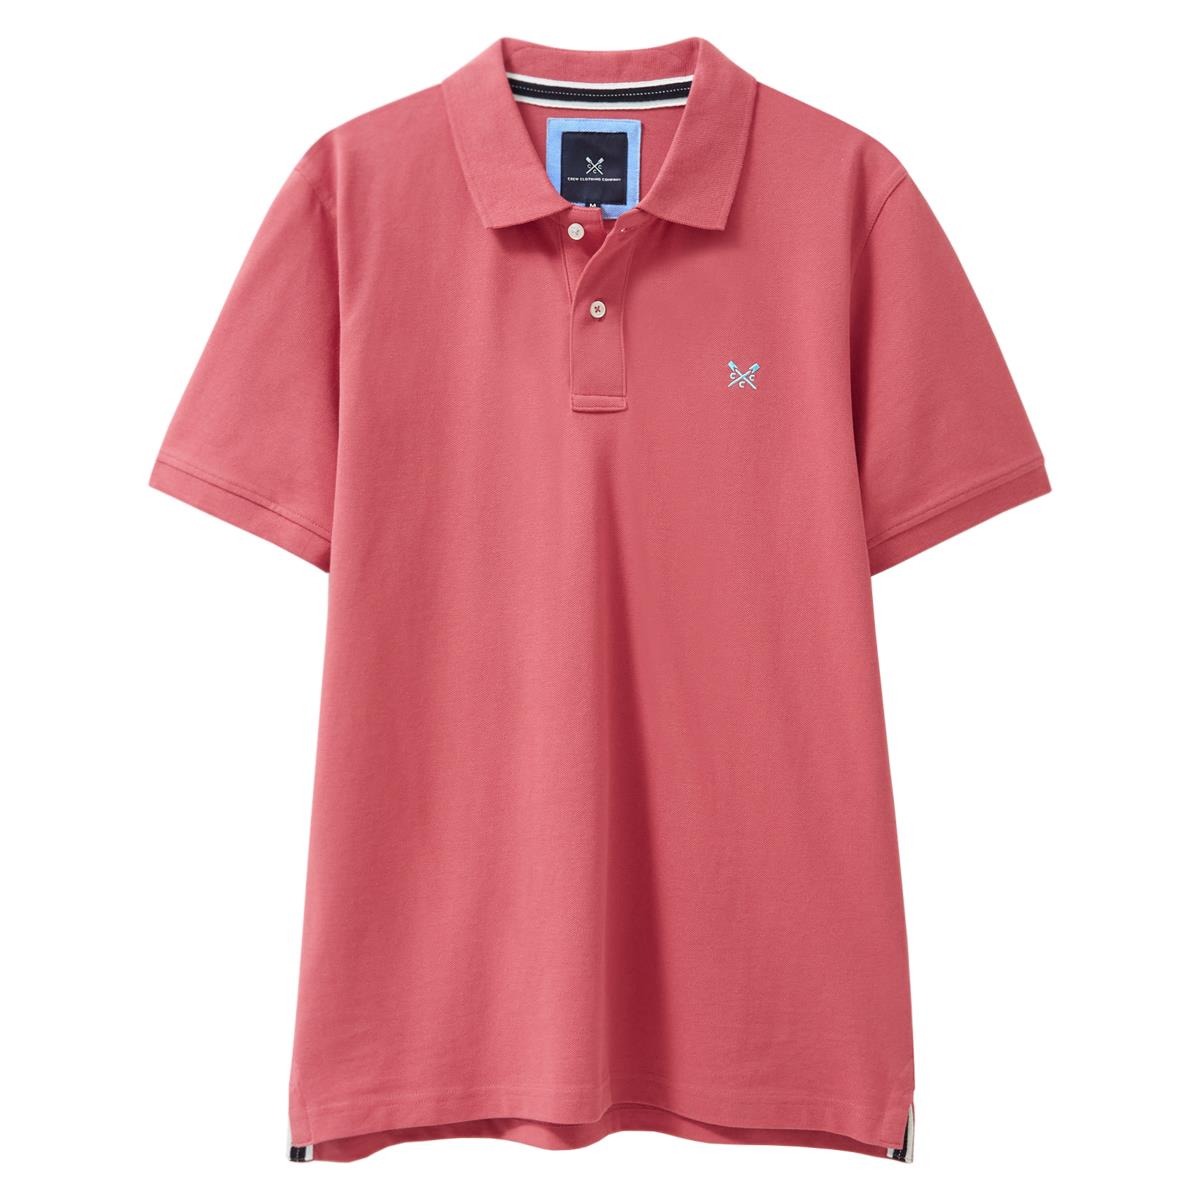 What colors do the crew polo shirts come in?